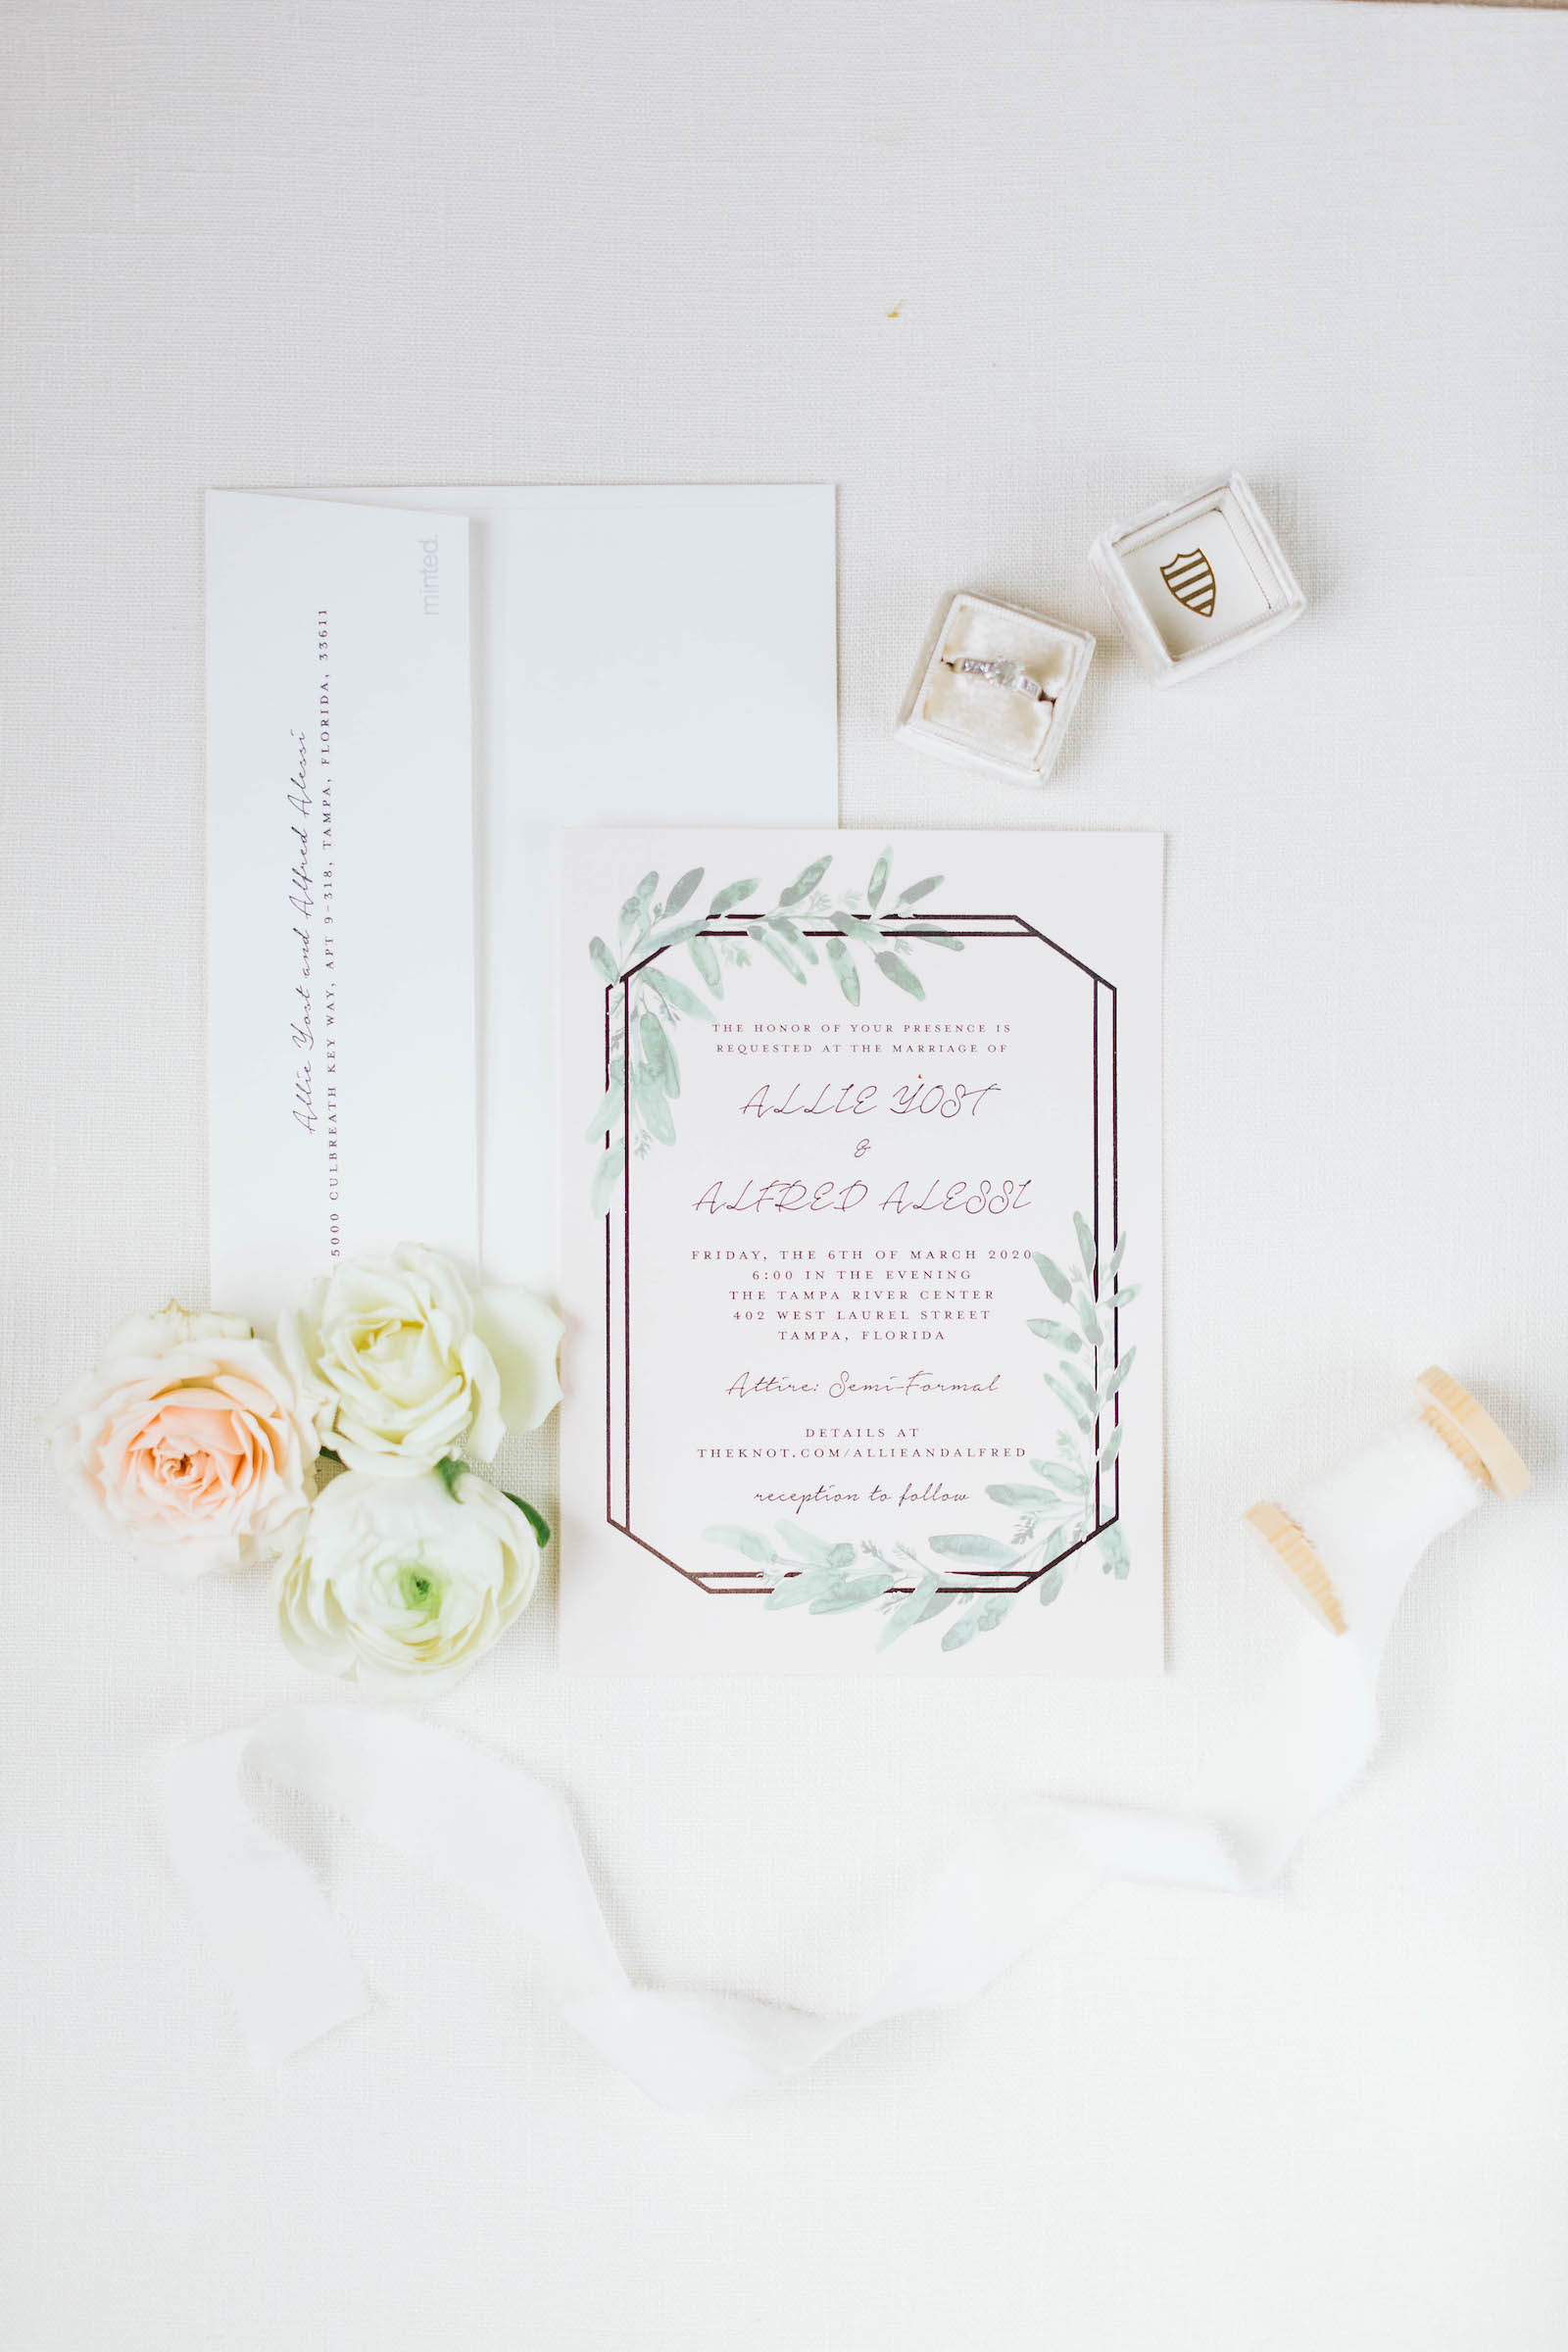 Boho Chic with Watercolor Greenery Leaves and Geometric Frame Wedding Invitation, Engagement Ring in Velvet The Mrs Box